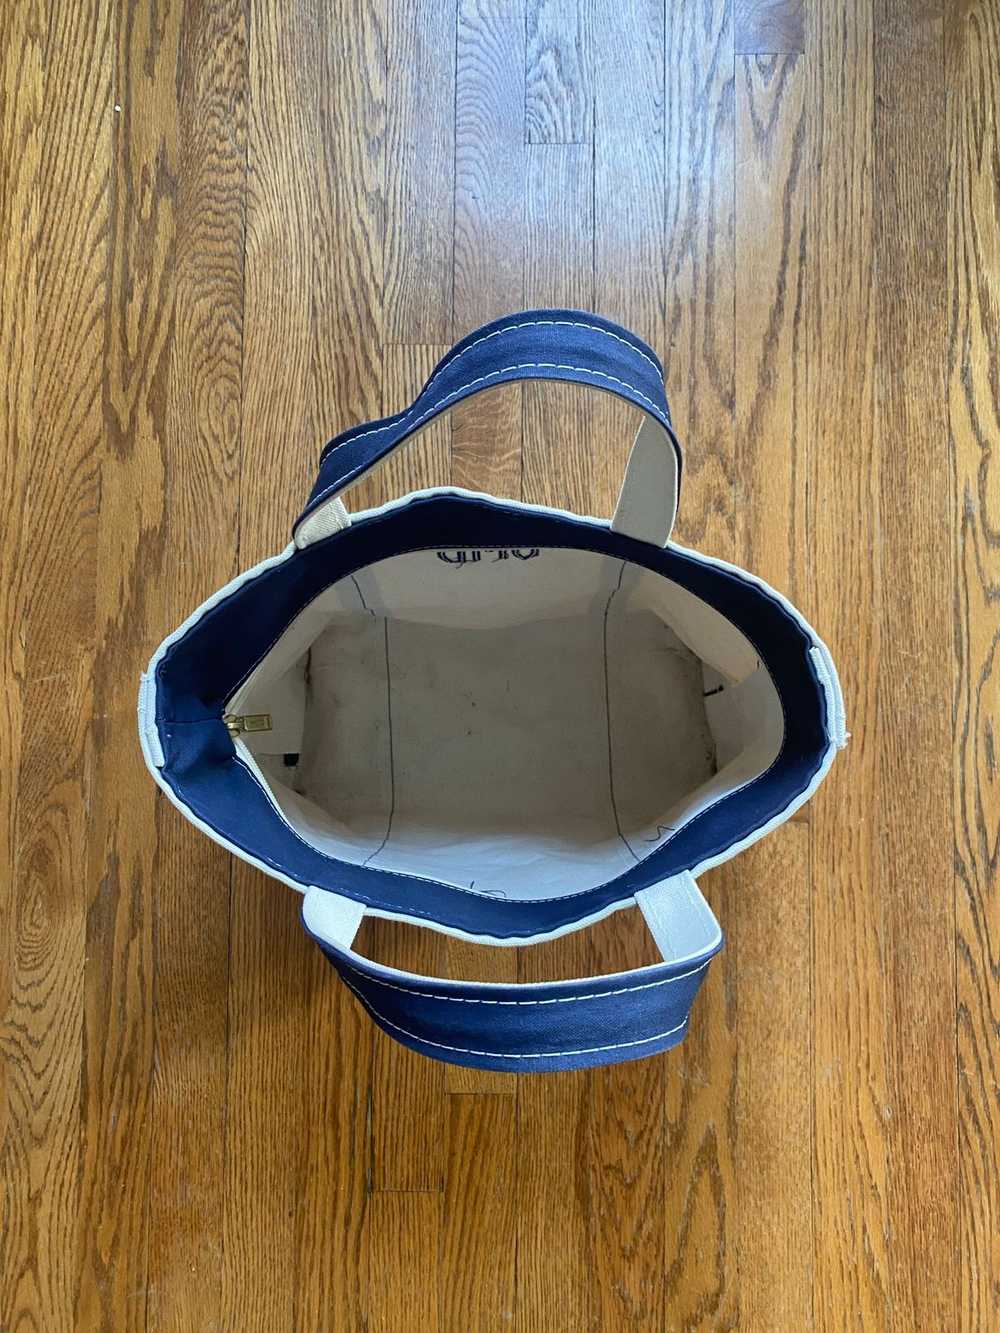 L.L. Bean LL Bean Embroidered Boat Tote - image 3